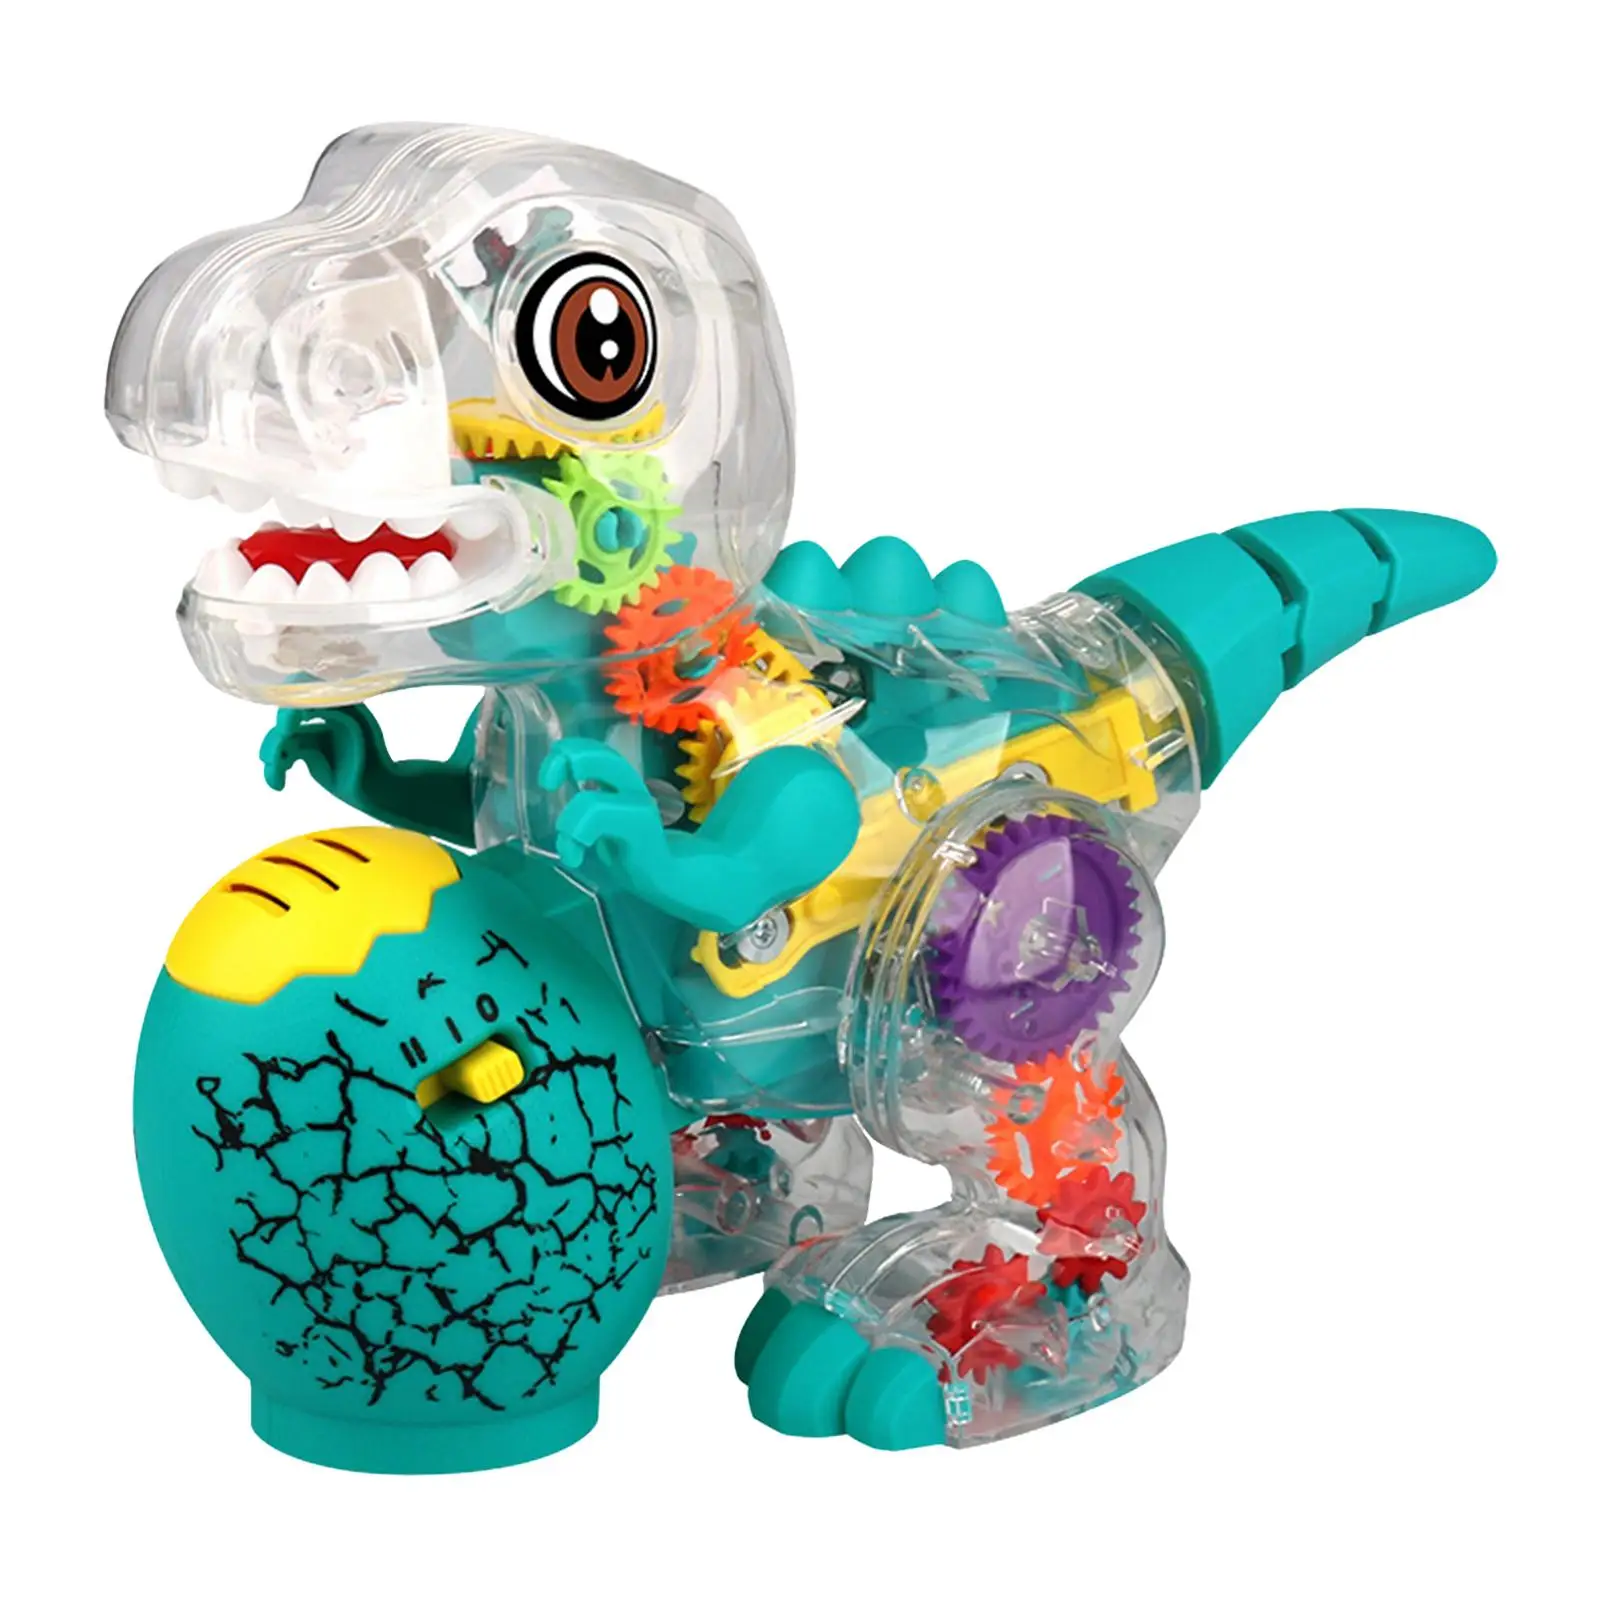 Electric Dinosaur Toy Mechanical Toddlers Building Colored Moving Gears Halloween Musical Toy for Girls Boys Preschool Toy Kids